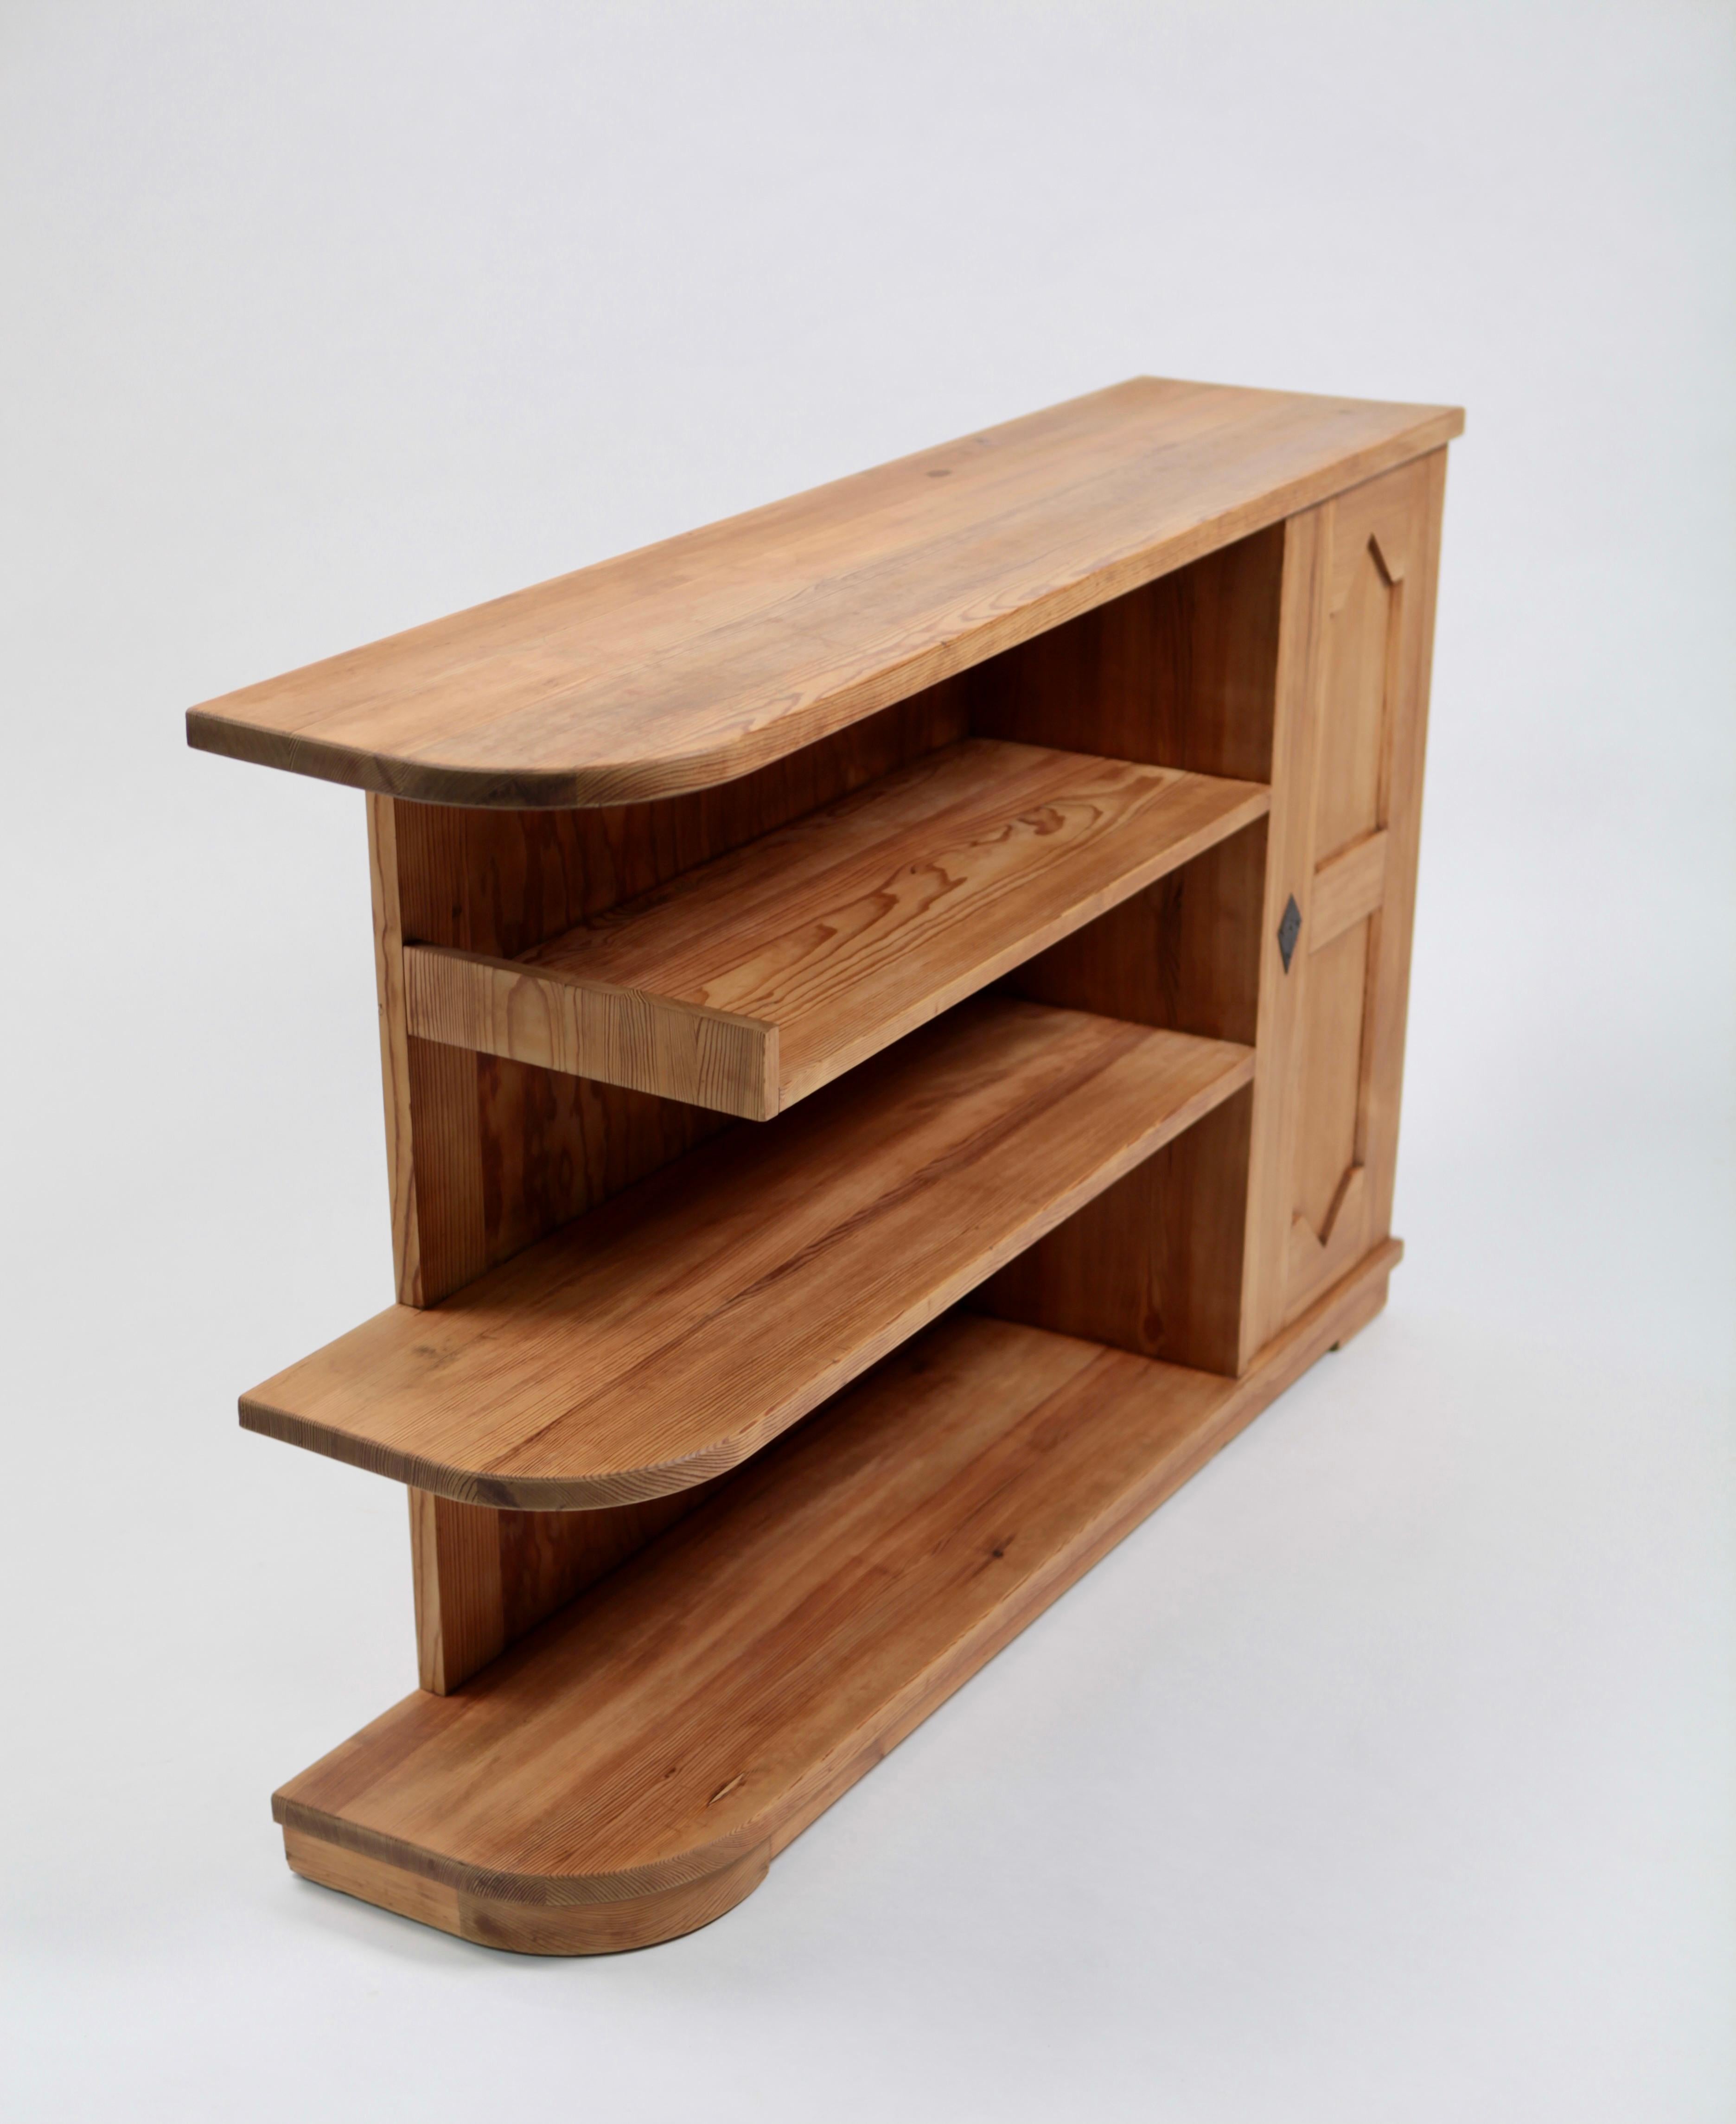 A Nordiska Kompaniet bookcase, designed by Axel Einar Hjorth in 1932.
This model has been executed in 1939 and is a 'new drawing' of the Lovö bookshelf by Axel Einar Hjorth from 1932.
The drawing by NK, in the archive of the Nordic Museum is from